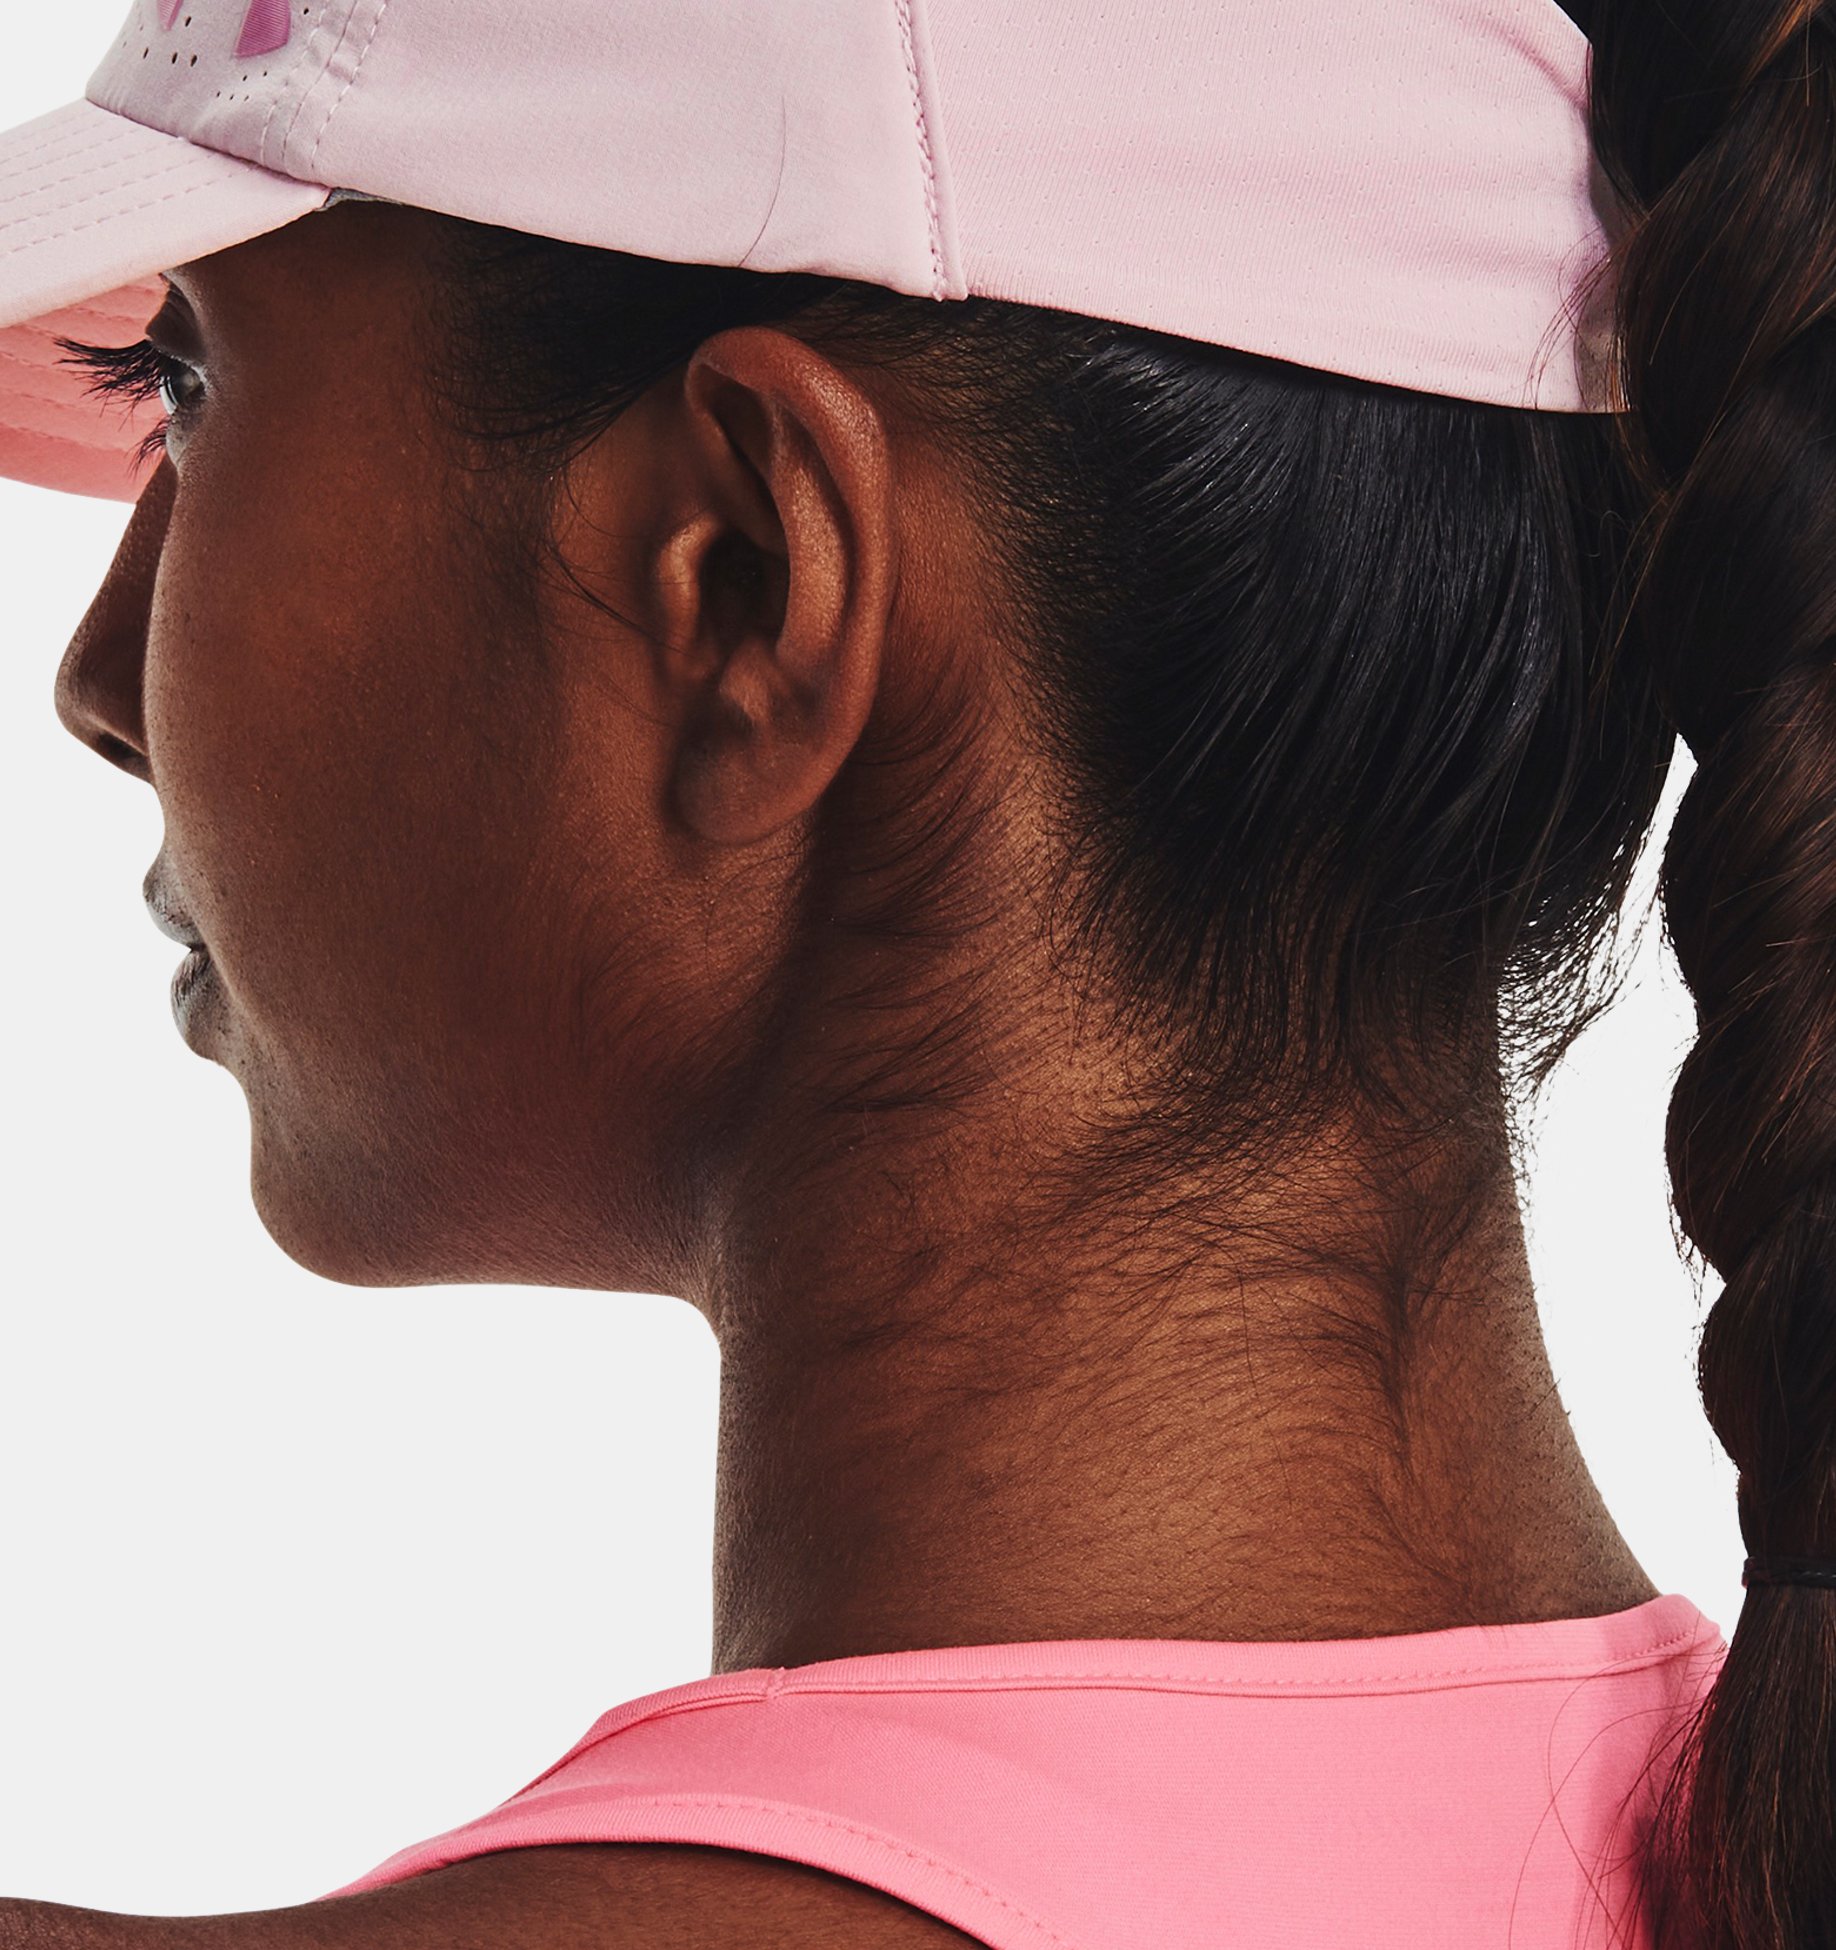 Under Armour Women's UA Iso-Chill Launch Wrapback Cap